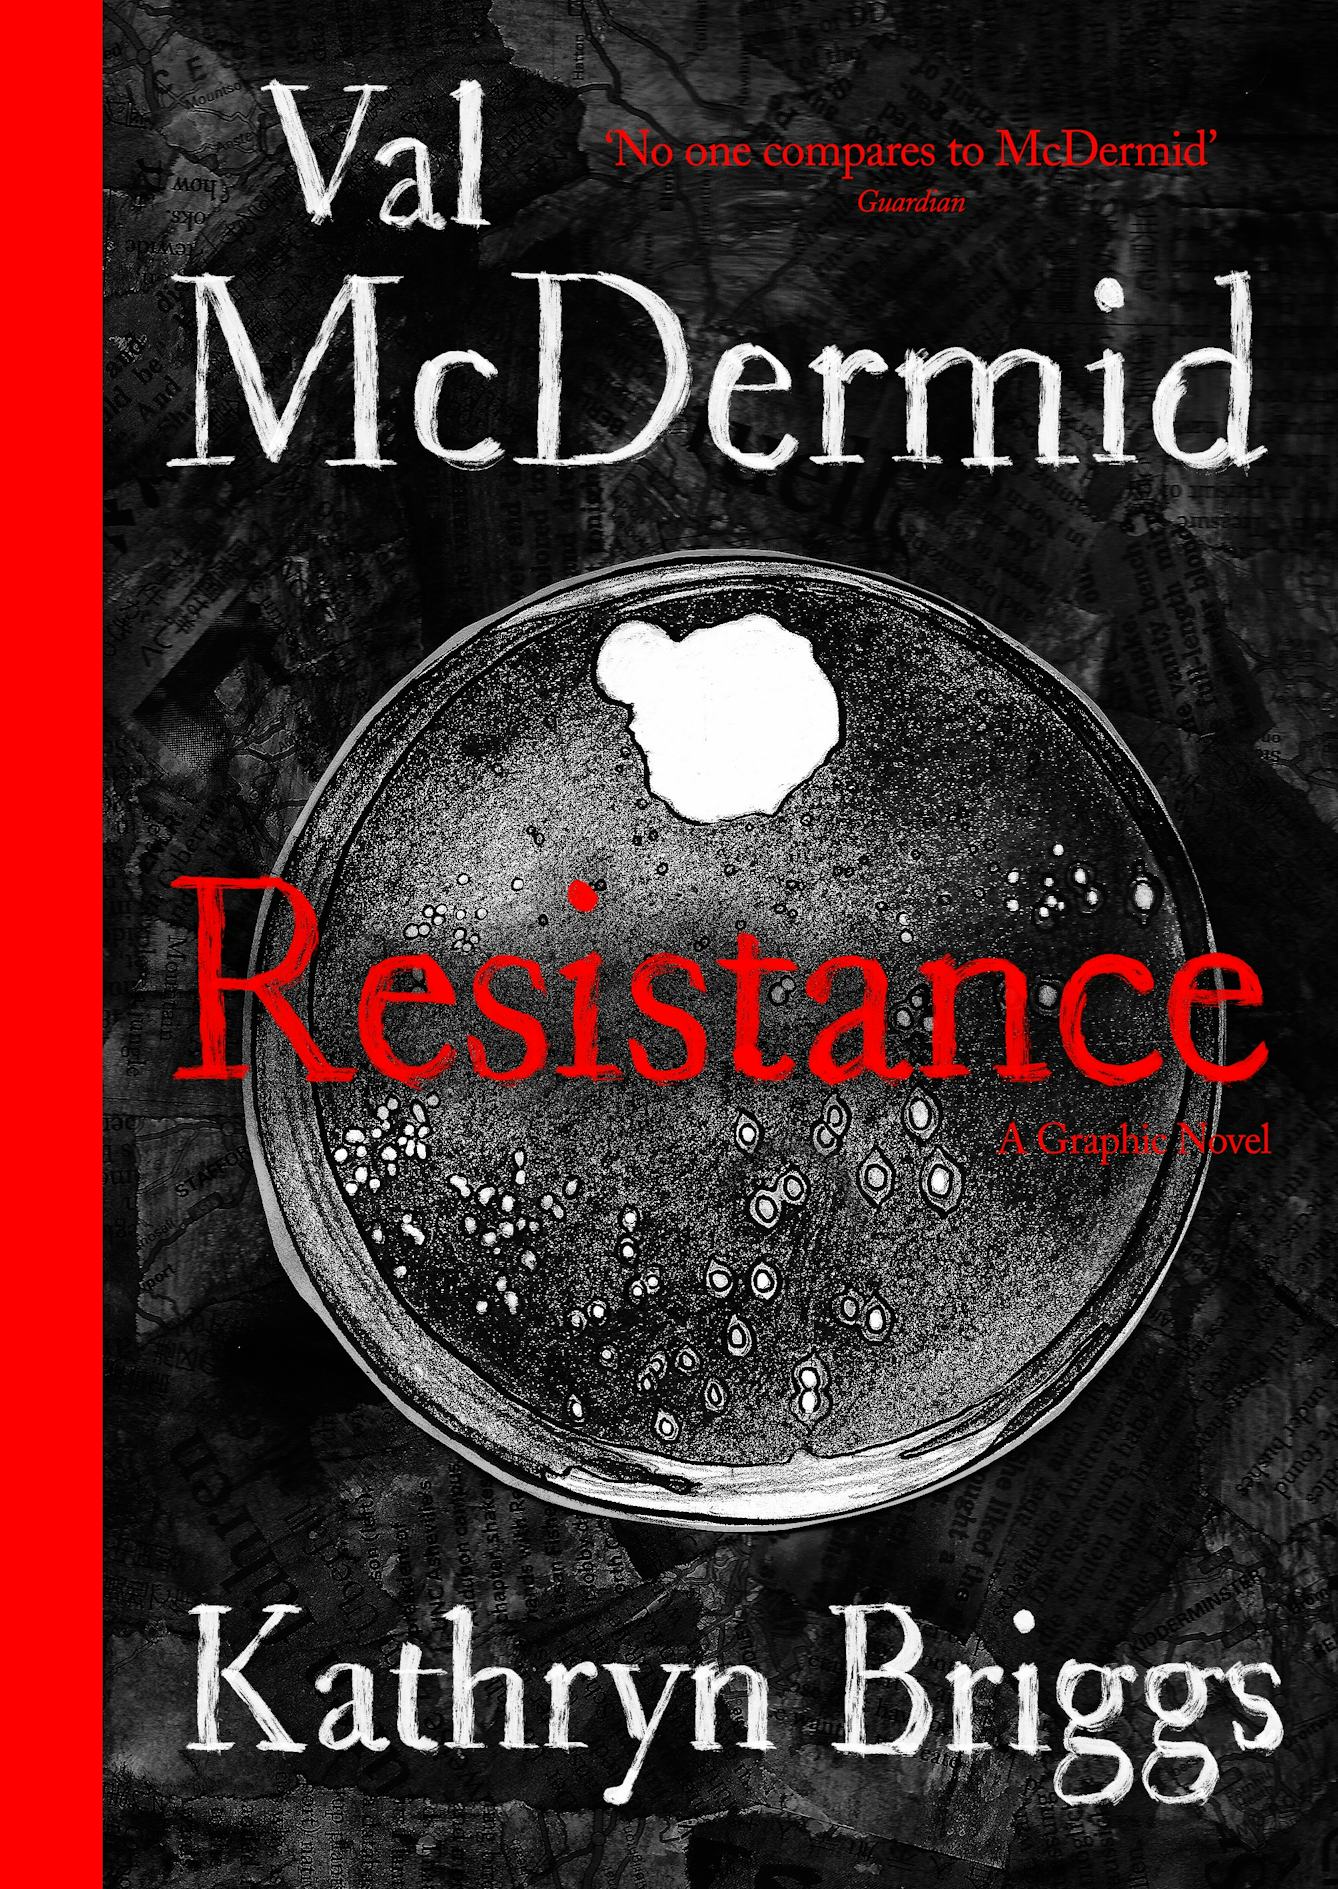 A book cover featuring a black and white photo and red text. The photo is of a petri dish containing white bacteria colonies.